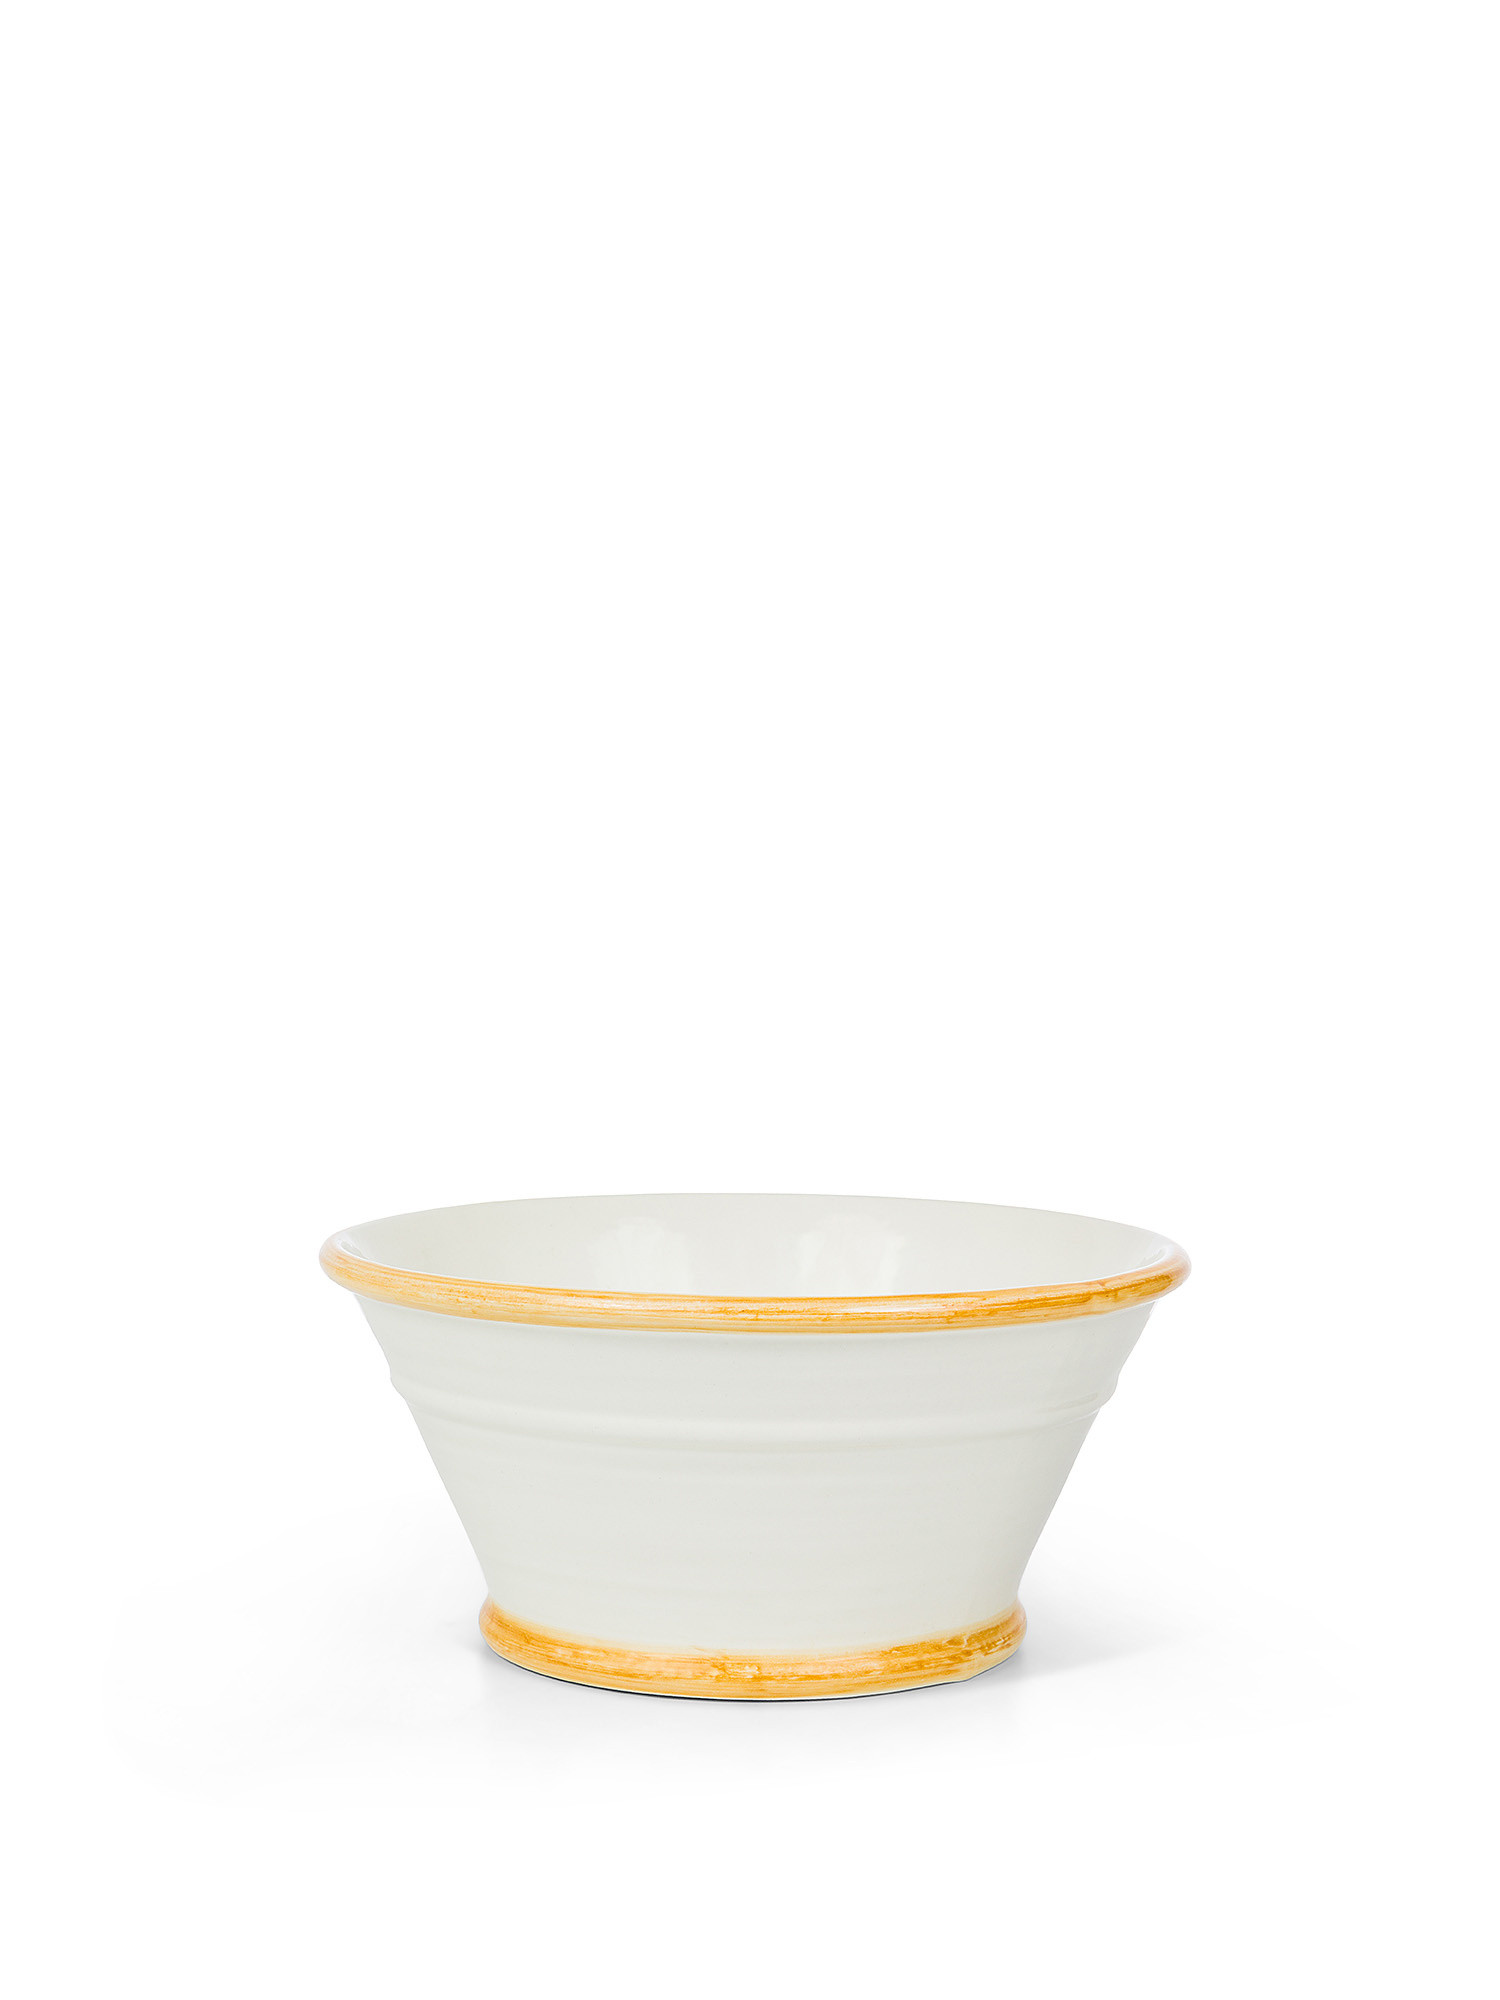 Ceramic salad bowl with colored edge, White, large image number 0